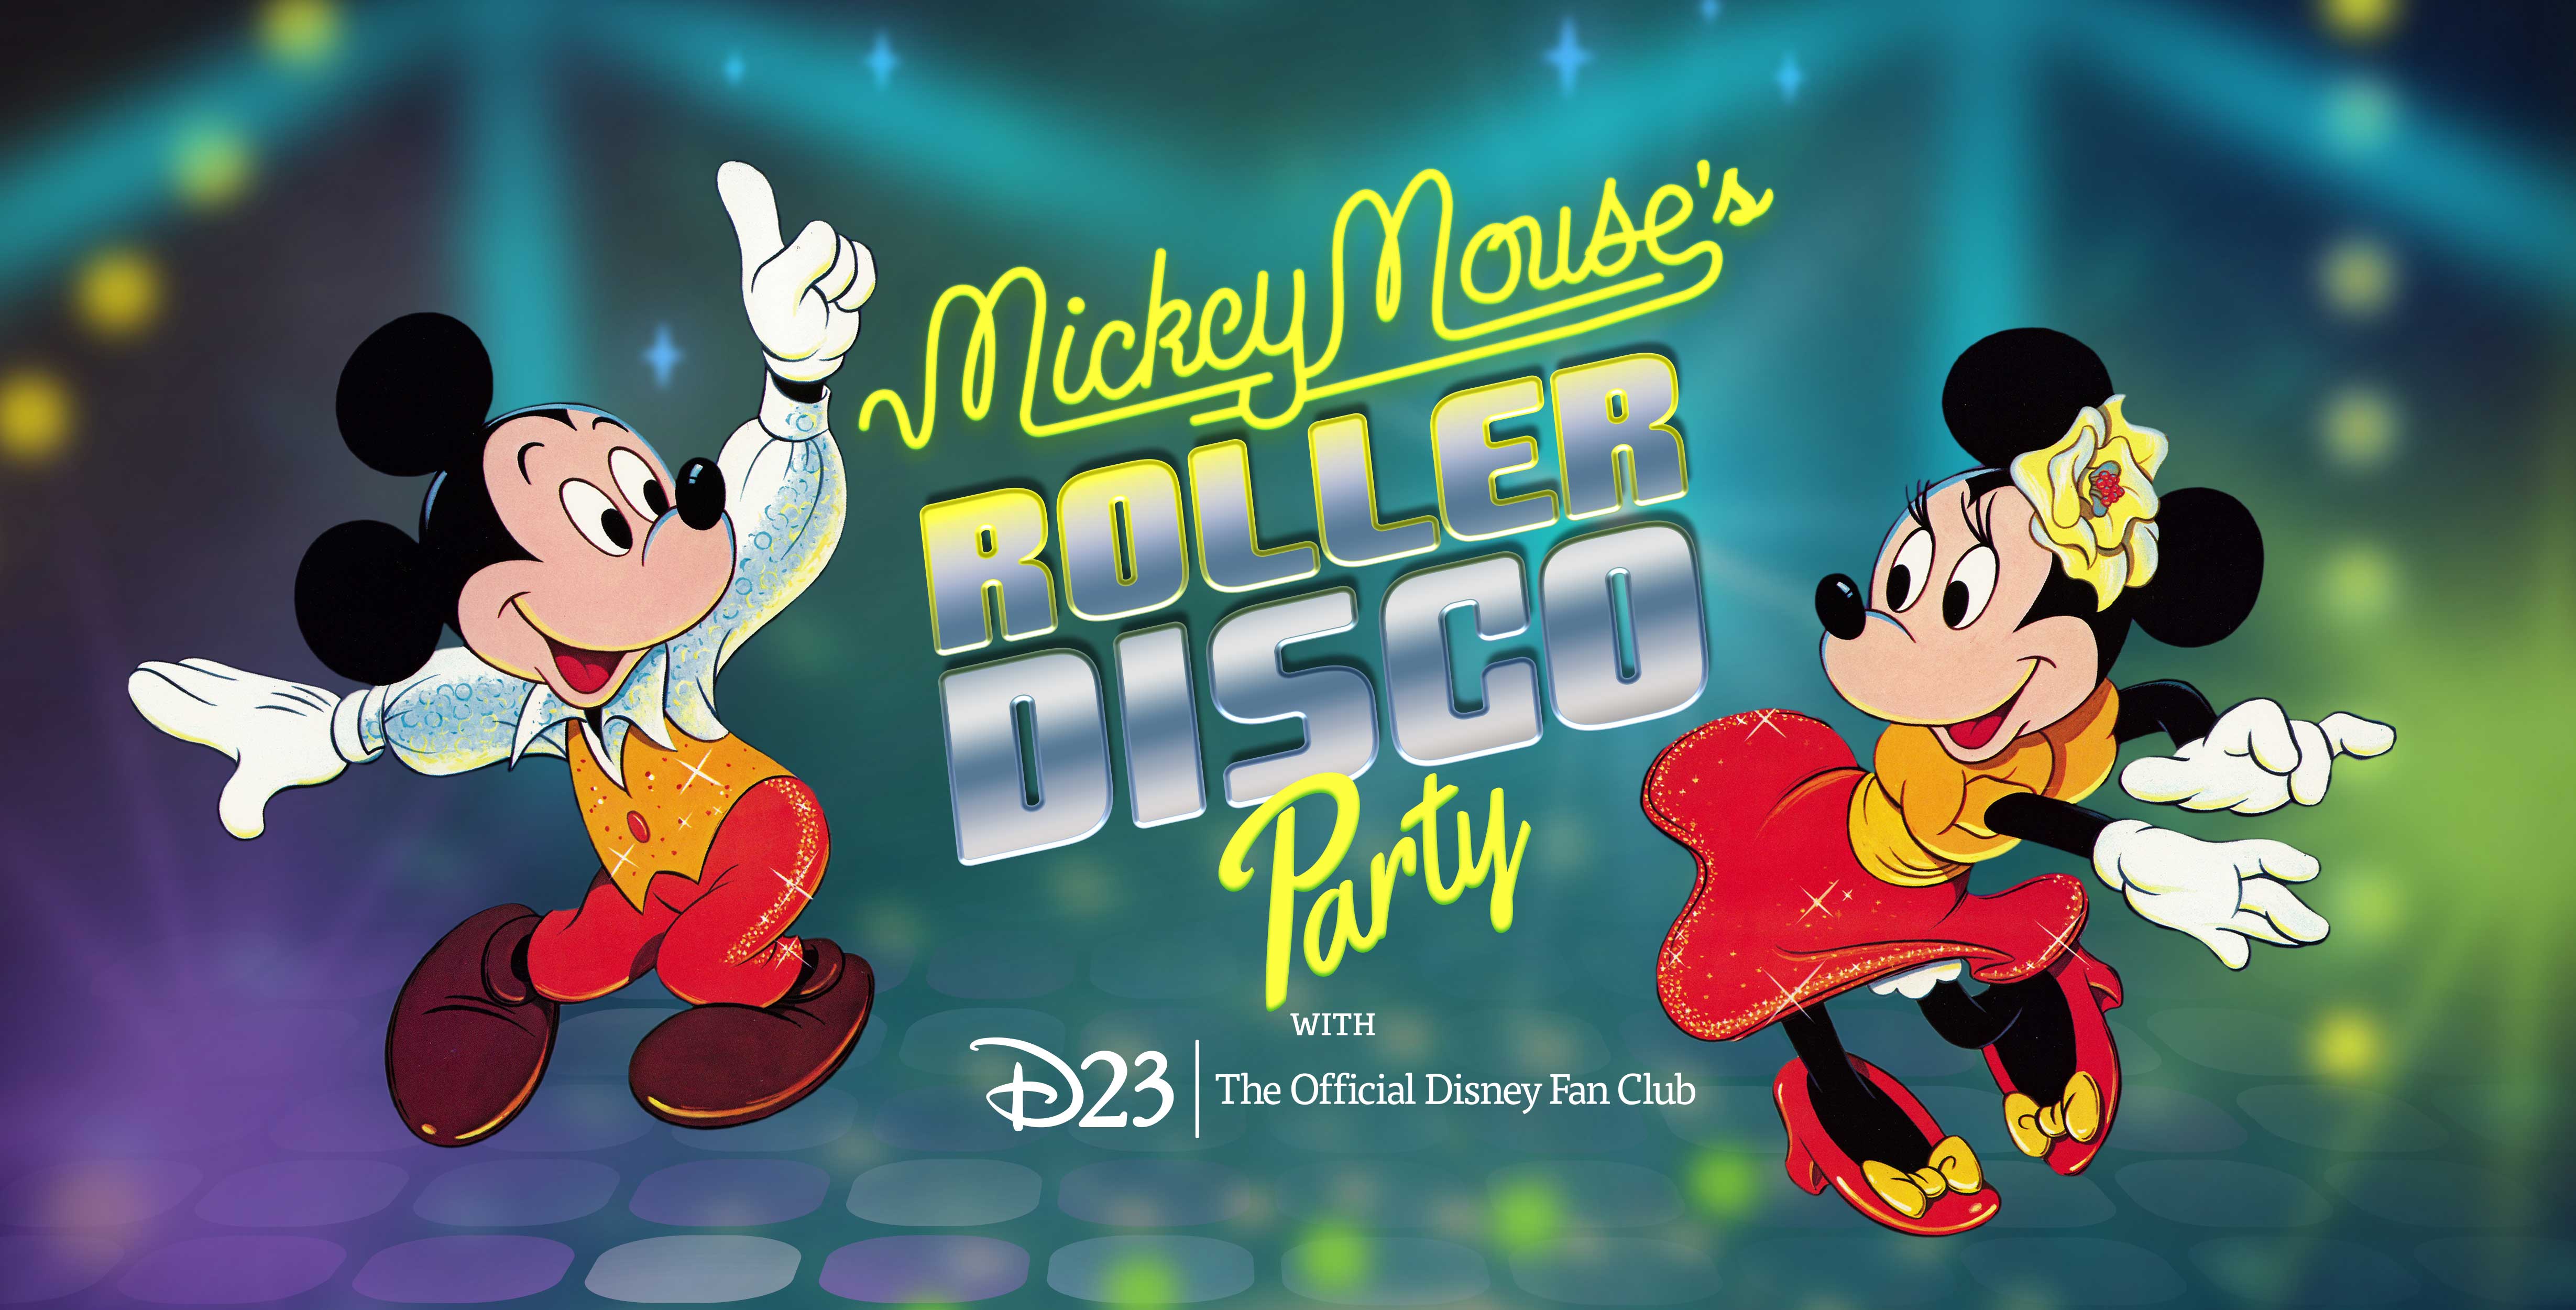 Mickey Mouse’s Roller Disco Party Coming to California!